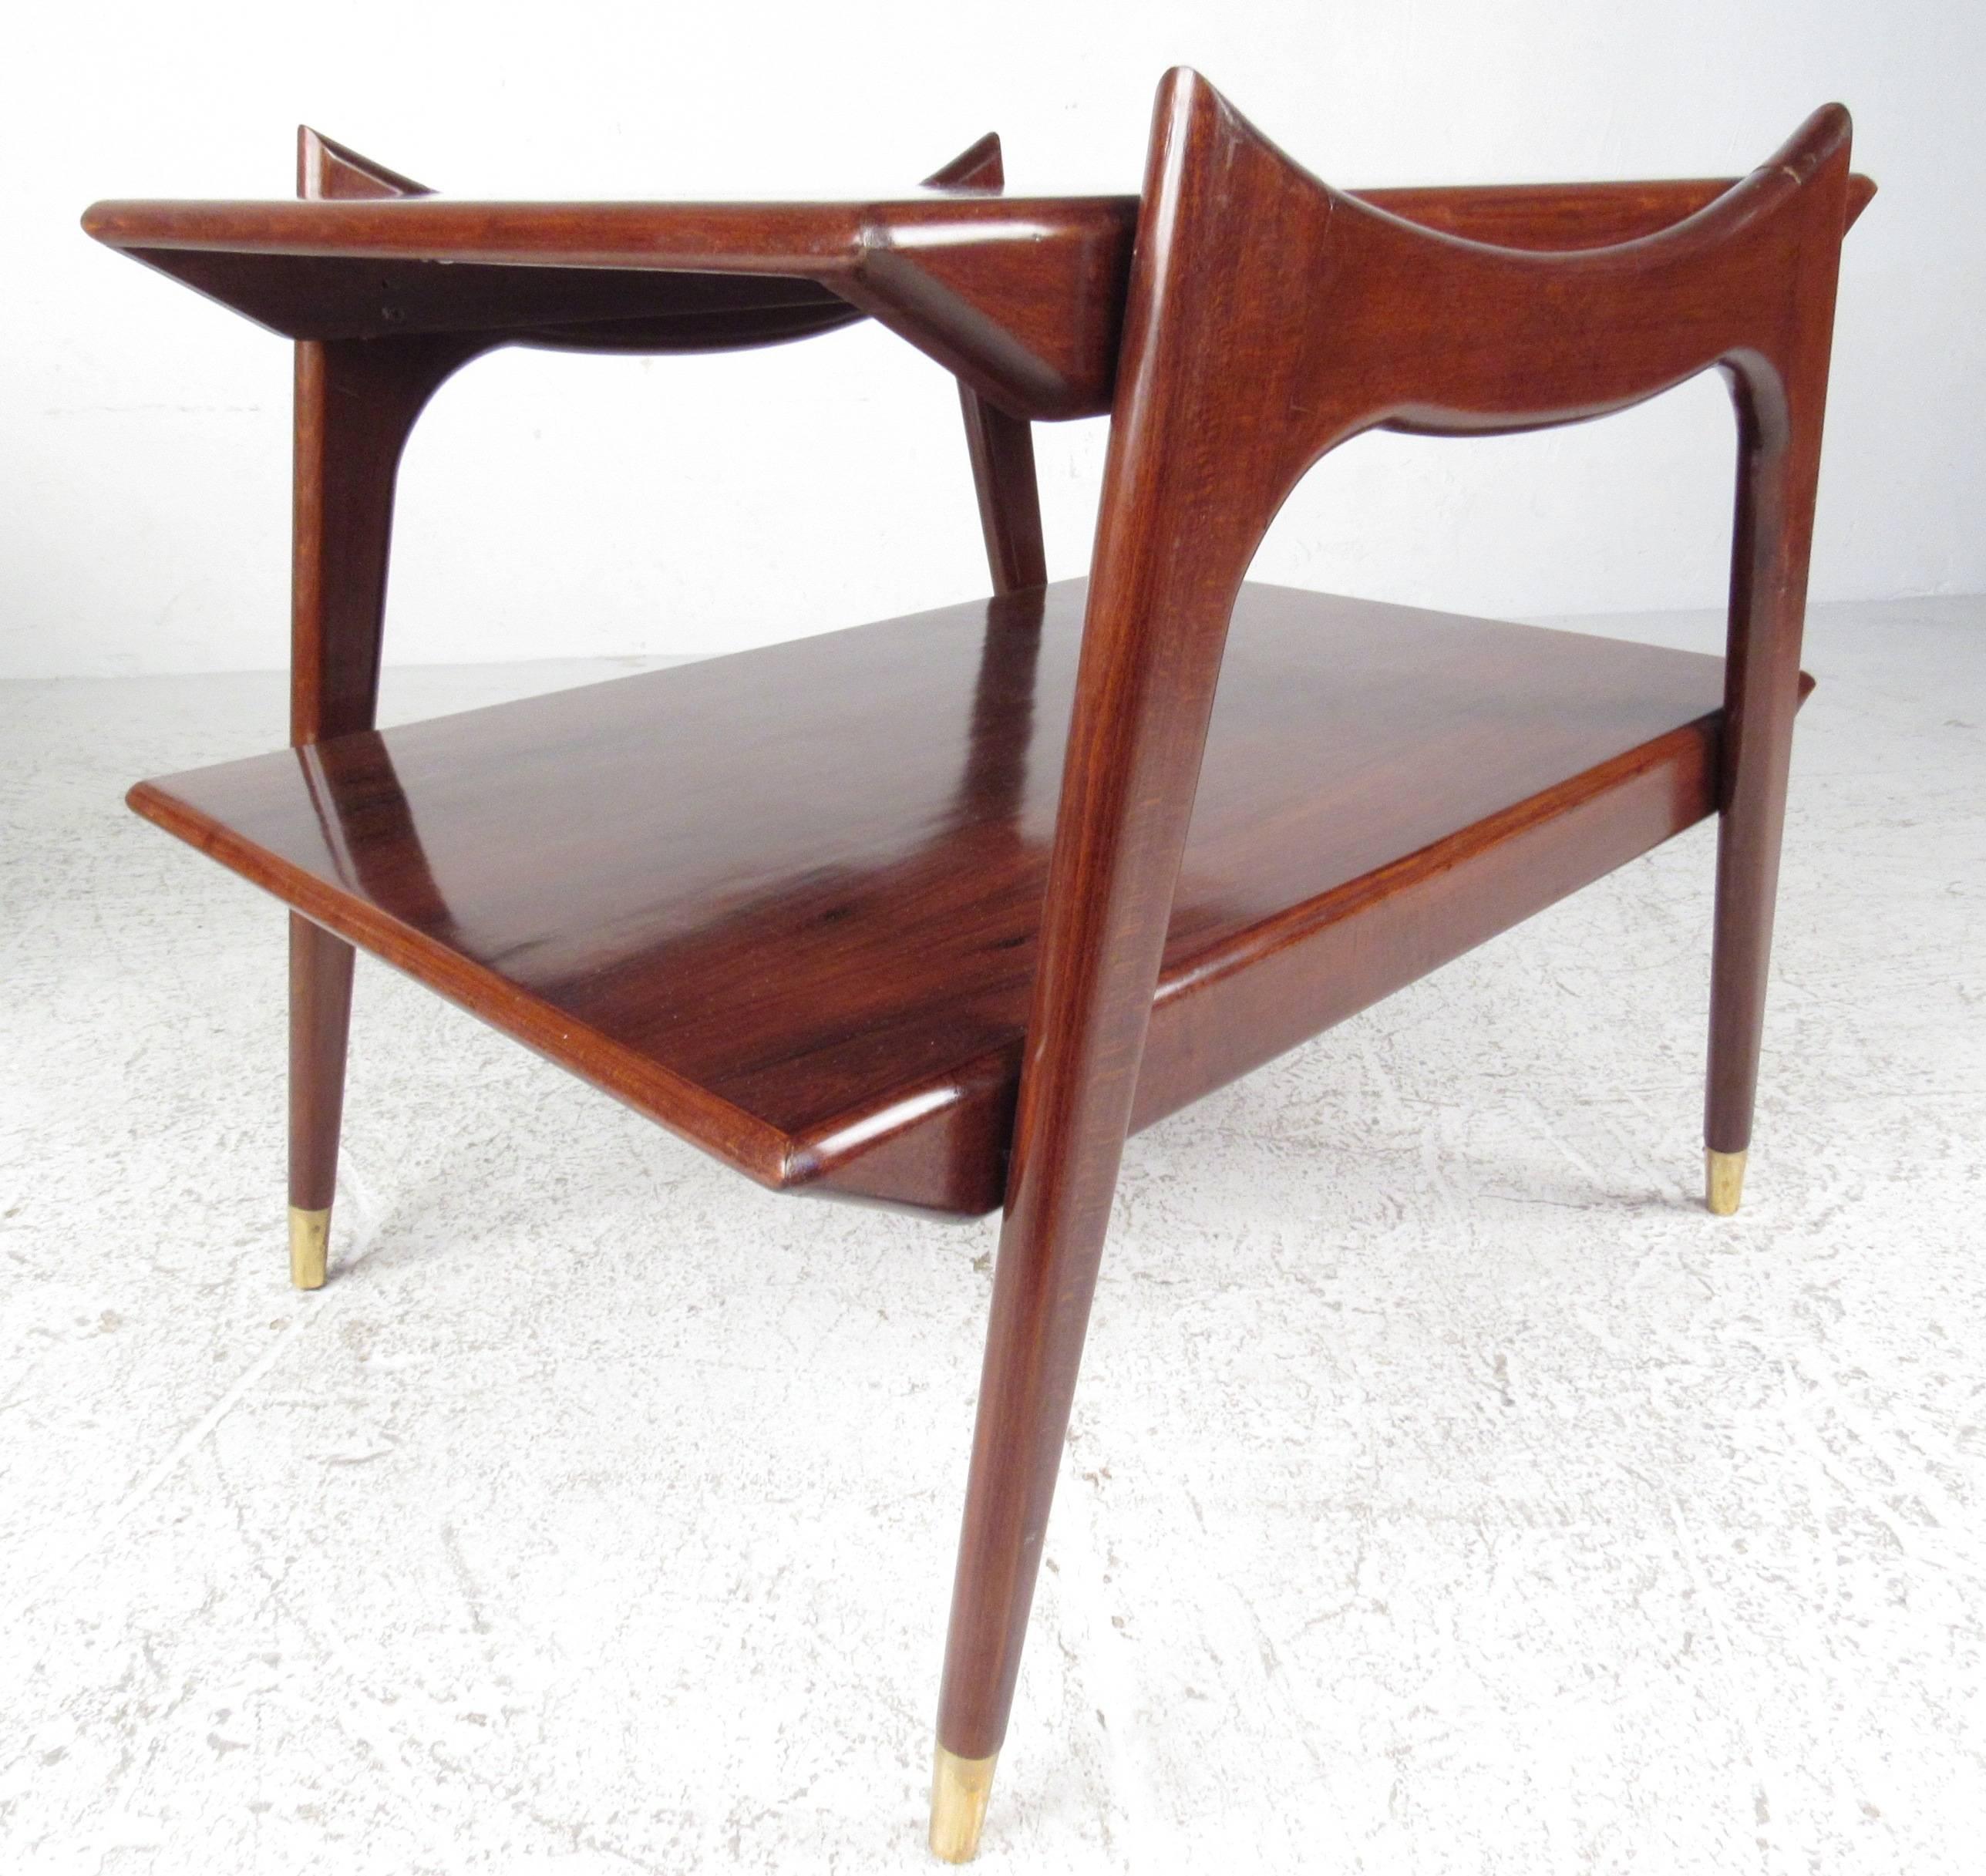 Gorgeous Italian style two-tier end tables with sculpted sides and capped feet. Made with rich rosewood grain and tapered legs, these tables make great sofa tables with extra storage underneath.

(Please confirm item location - NY or NJ - with